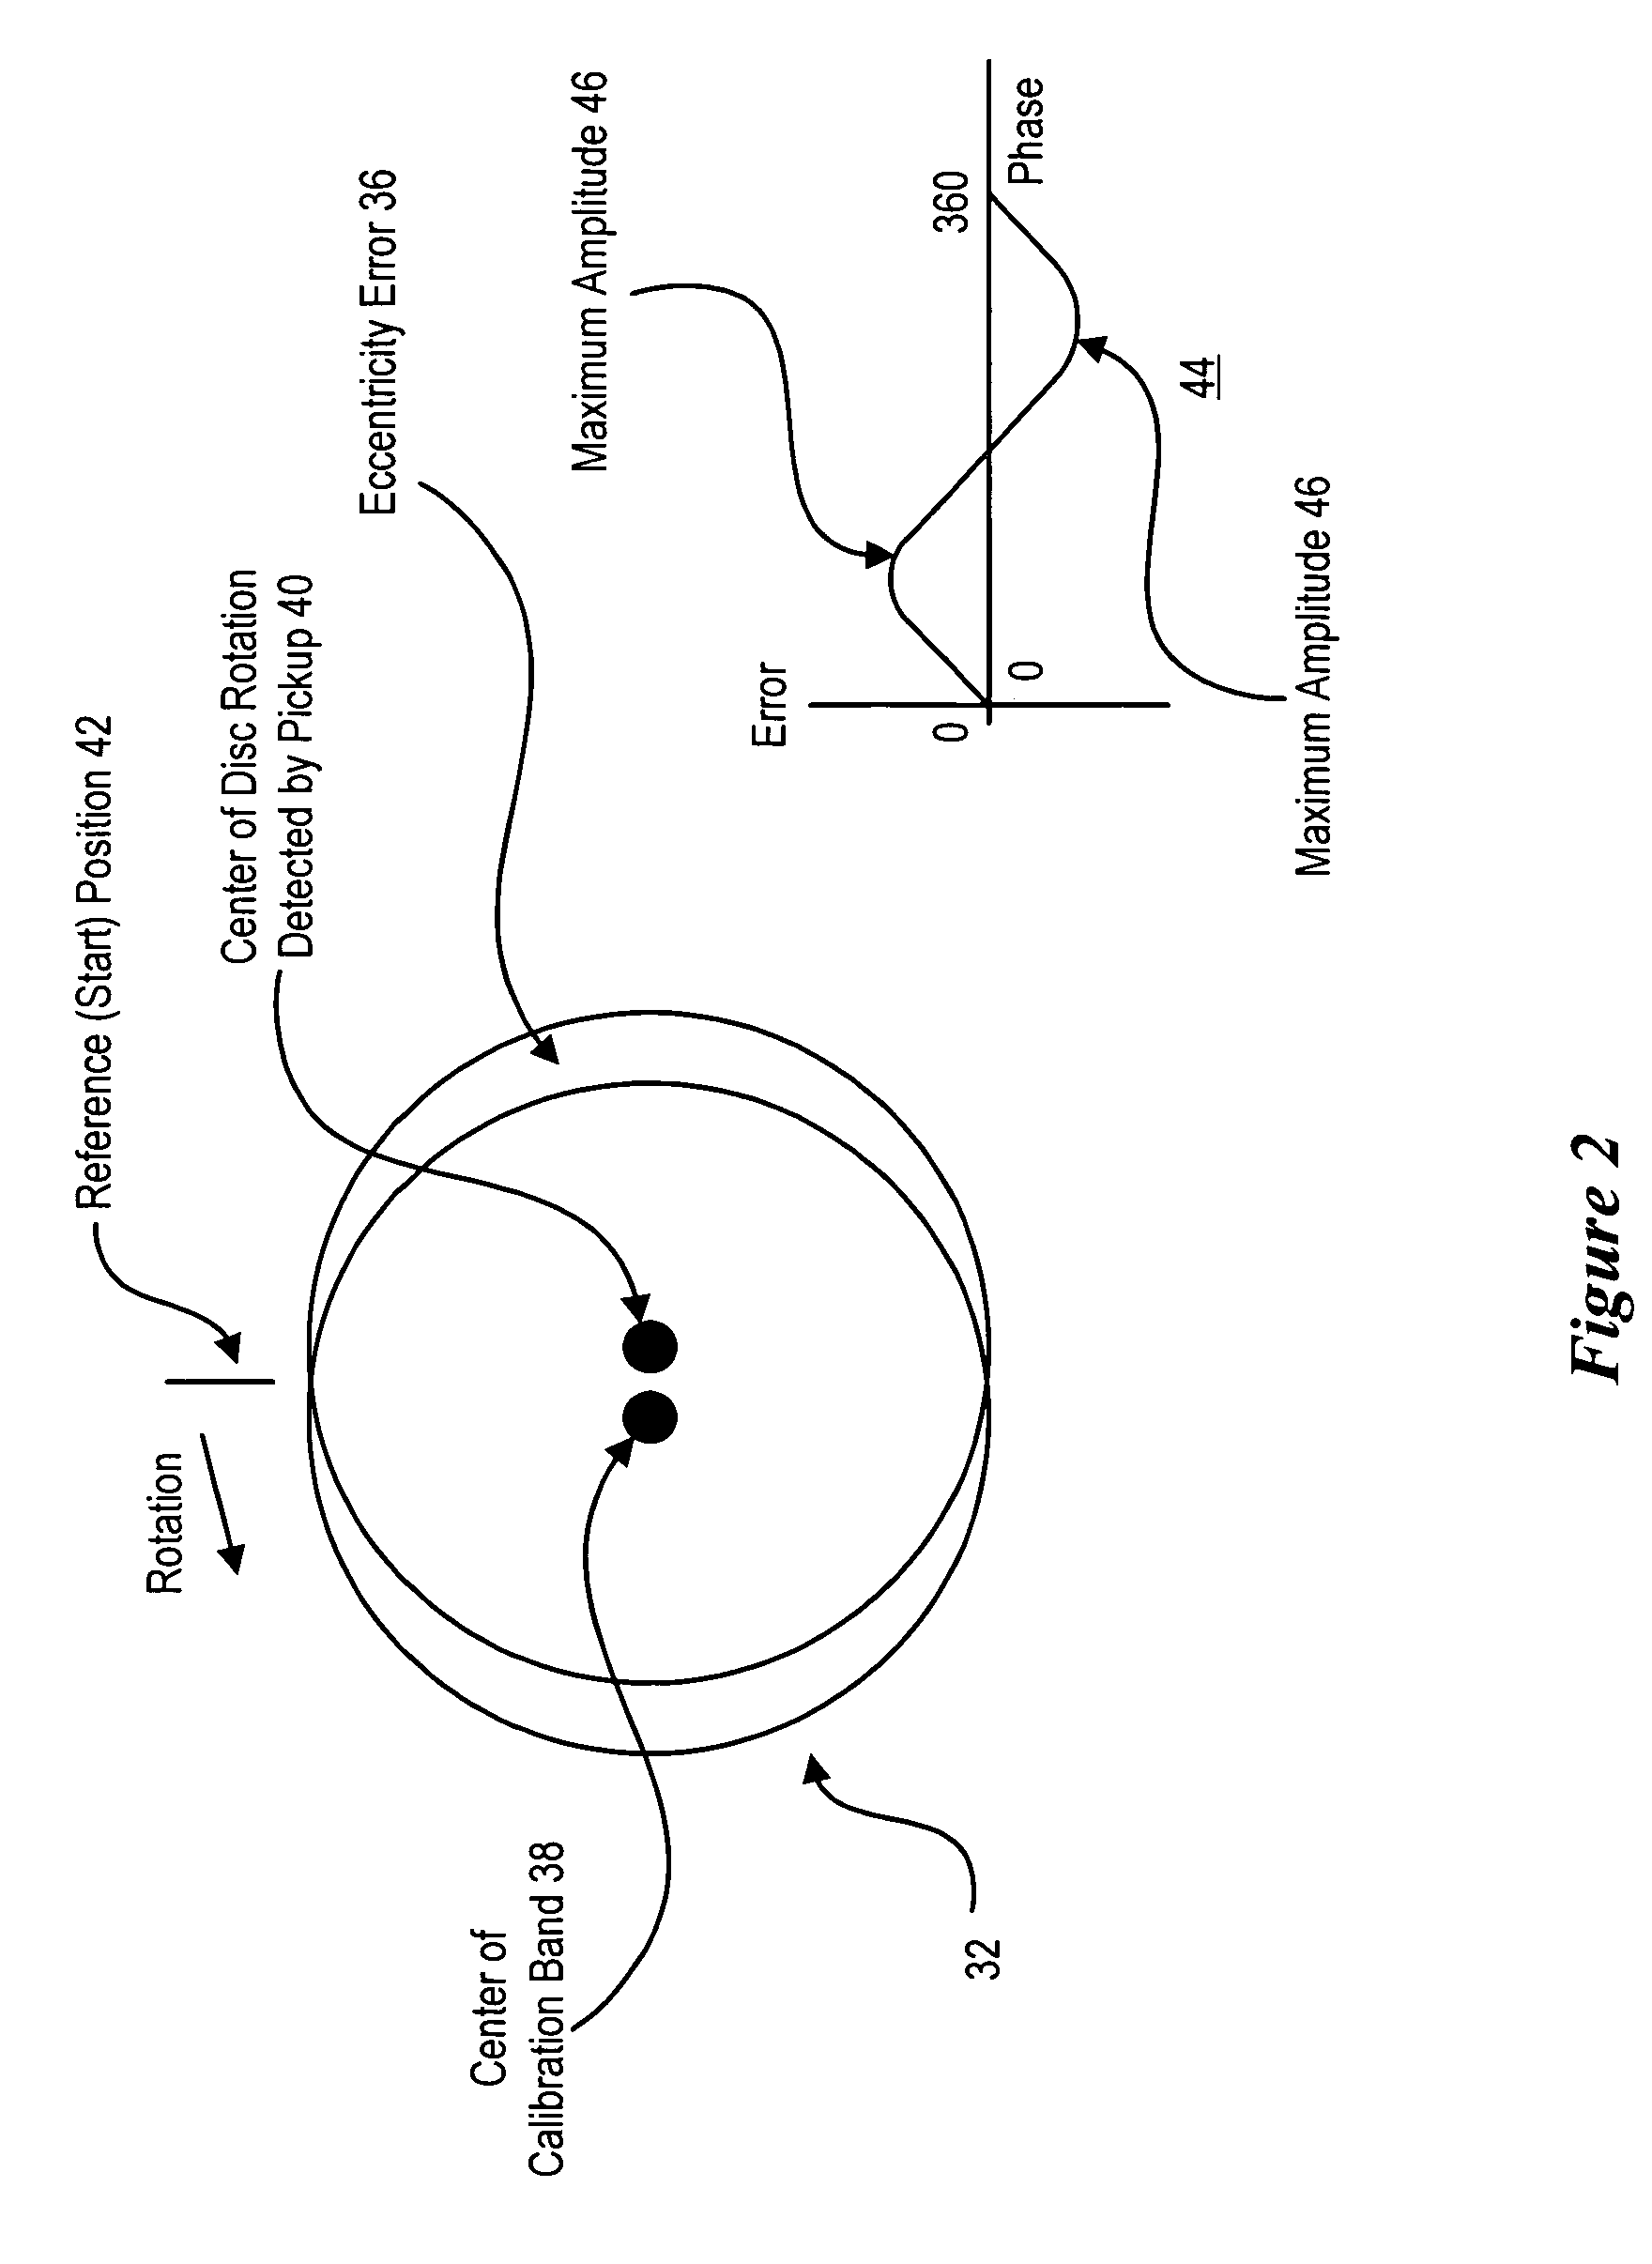 System and method for optical medium label alignment